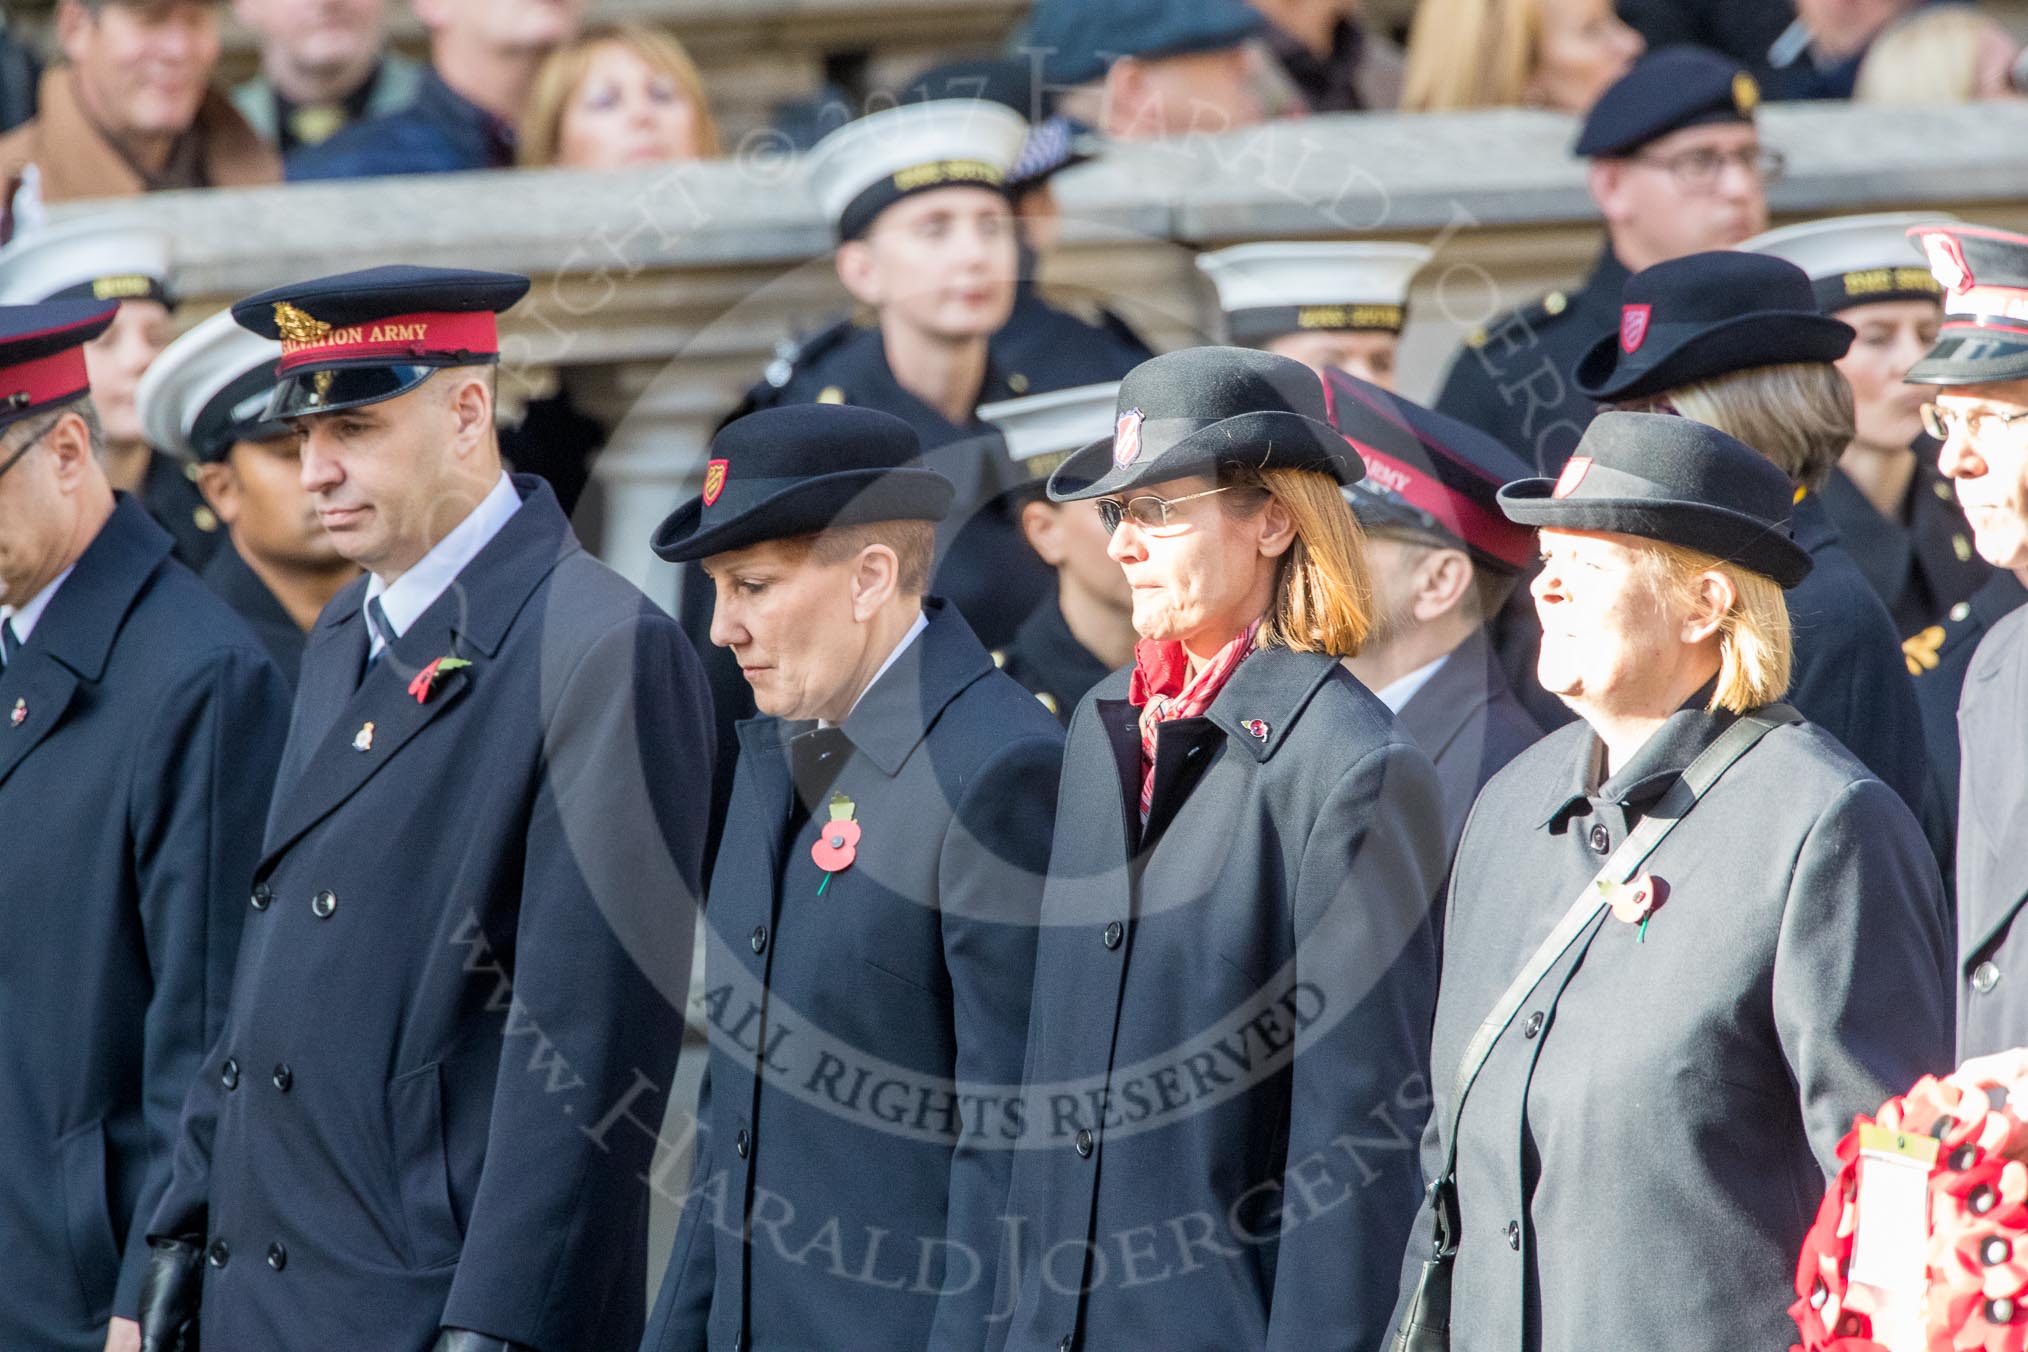 The Salvation Army (Group M6, 30 members) during the Royal British Legion March Past on Remembrance Sunday at the Cenotaph, Whitehall, Westminster, London, 11 November 2018, 12:25.